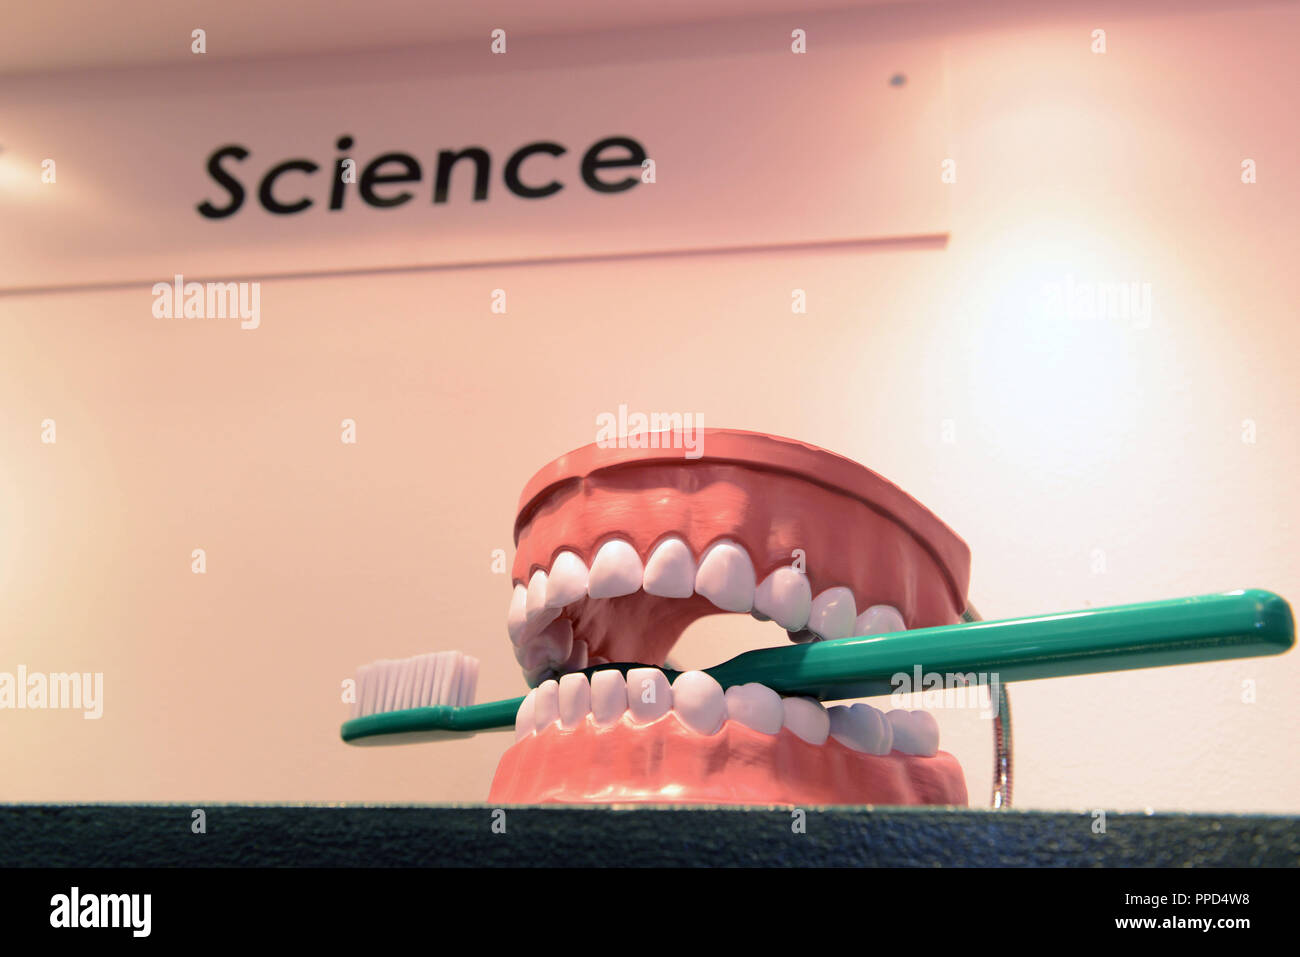 Learning materials for brushing teeth on a stand at the Toy Fair in Nuremberg. Stock Photo